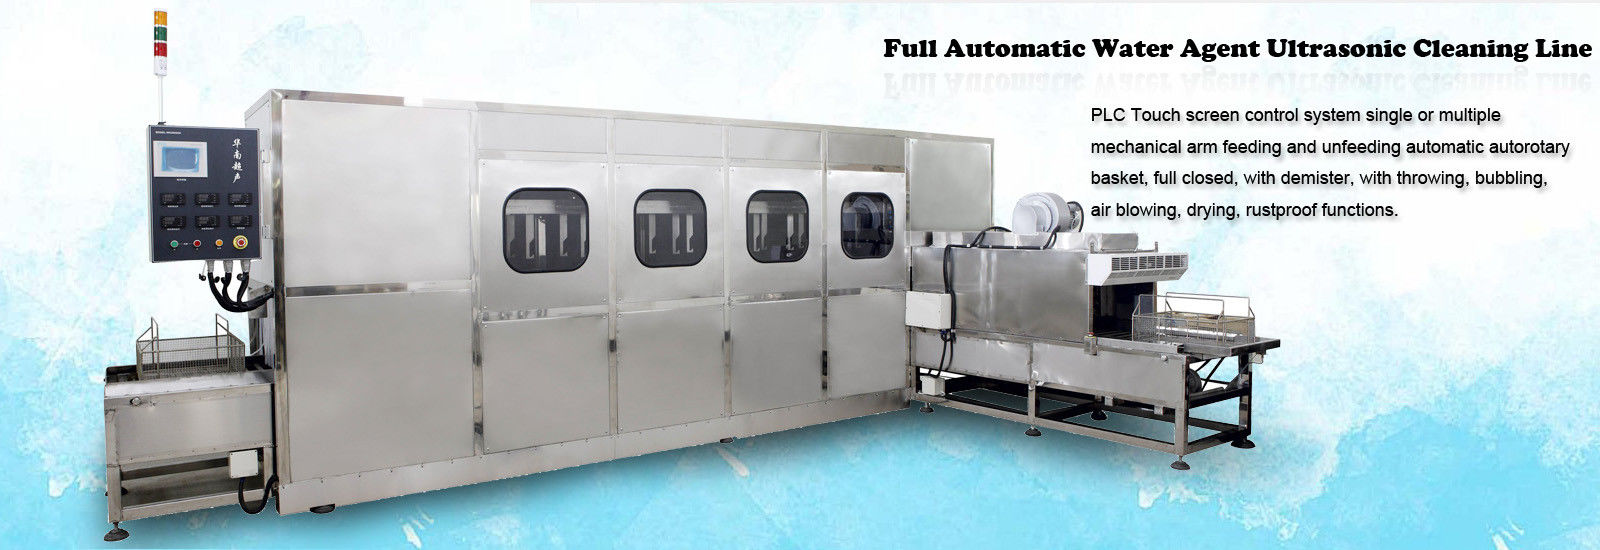 China best Ultrasonic Cleaner Machine on sales